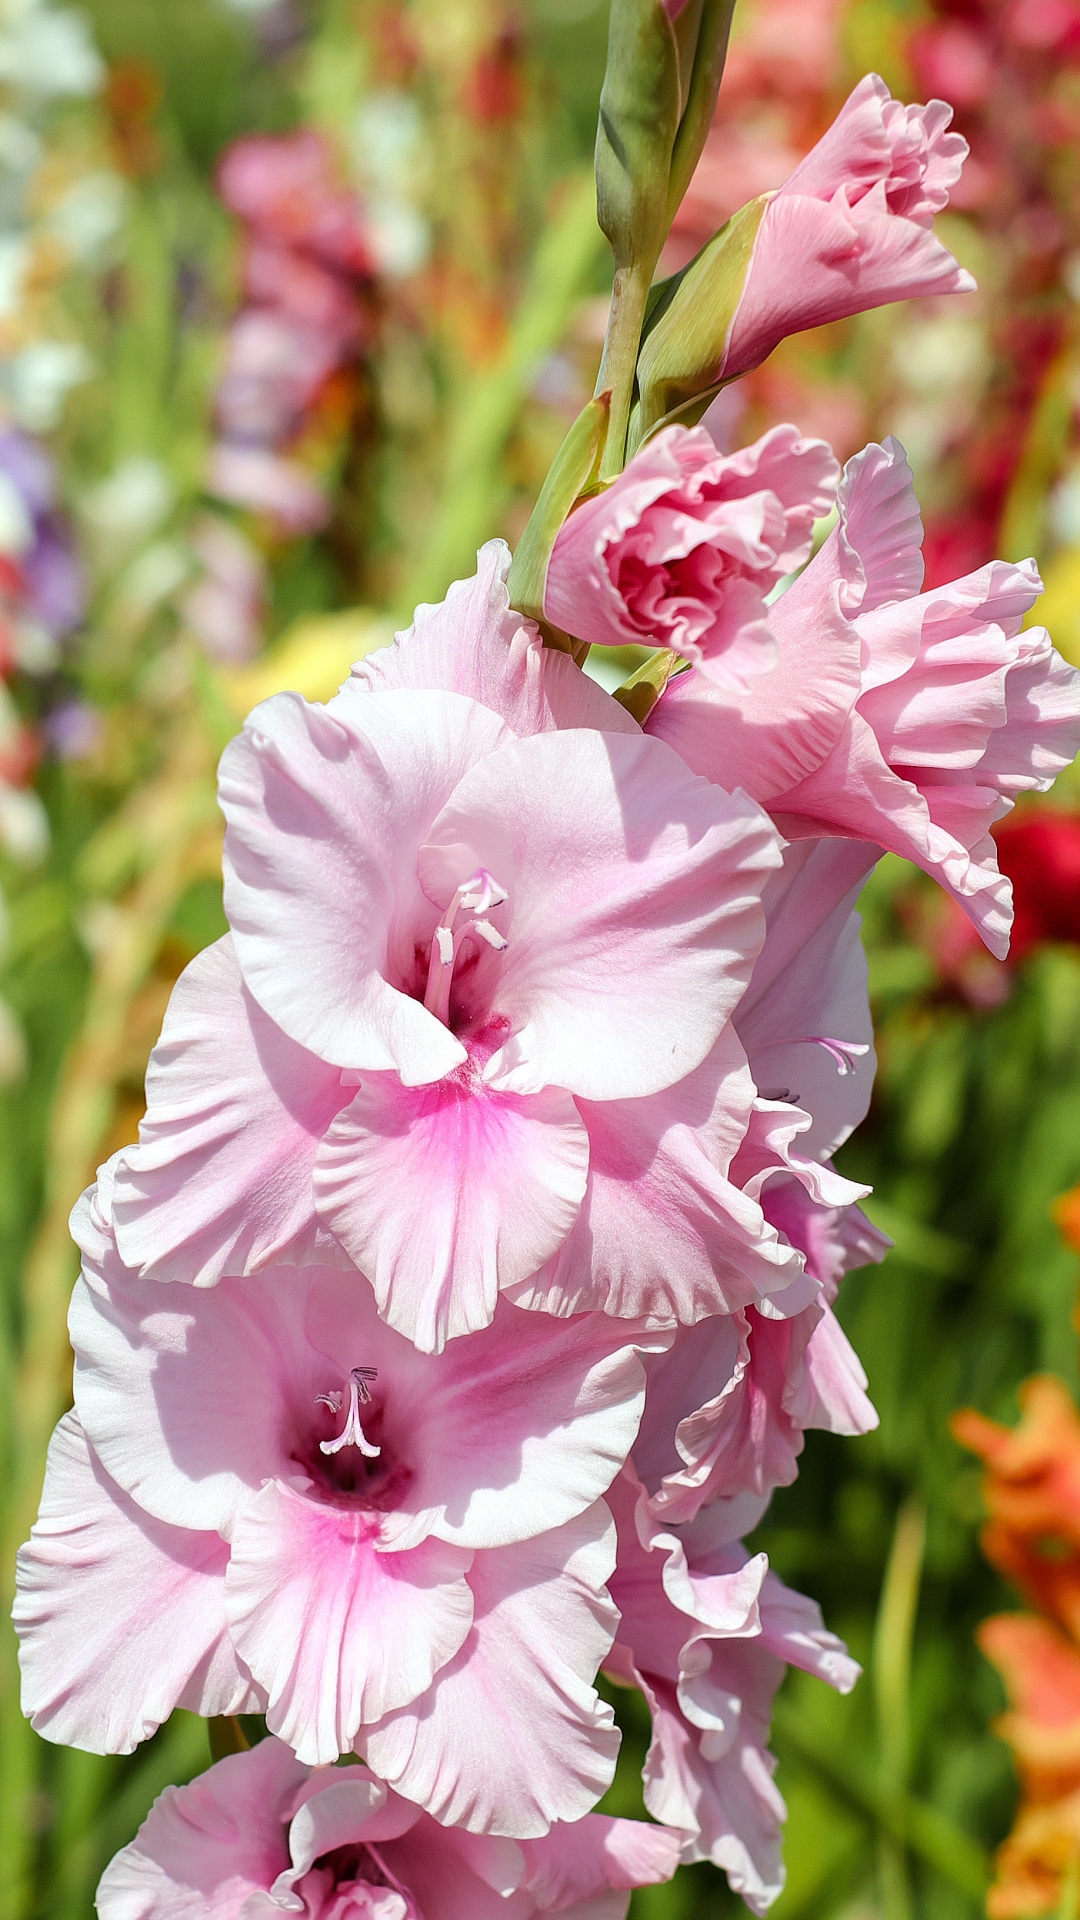 gladiolus, earth, nature, flower, pink flower, flowers cell phone wallpapers